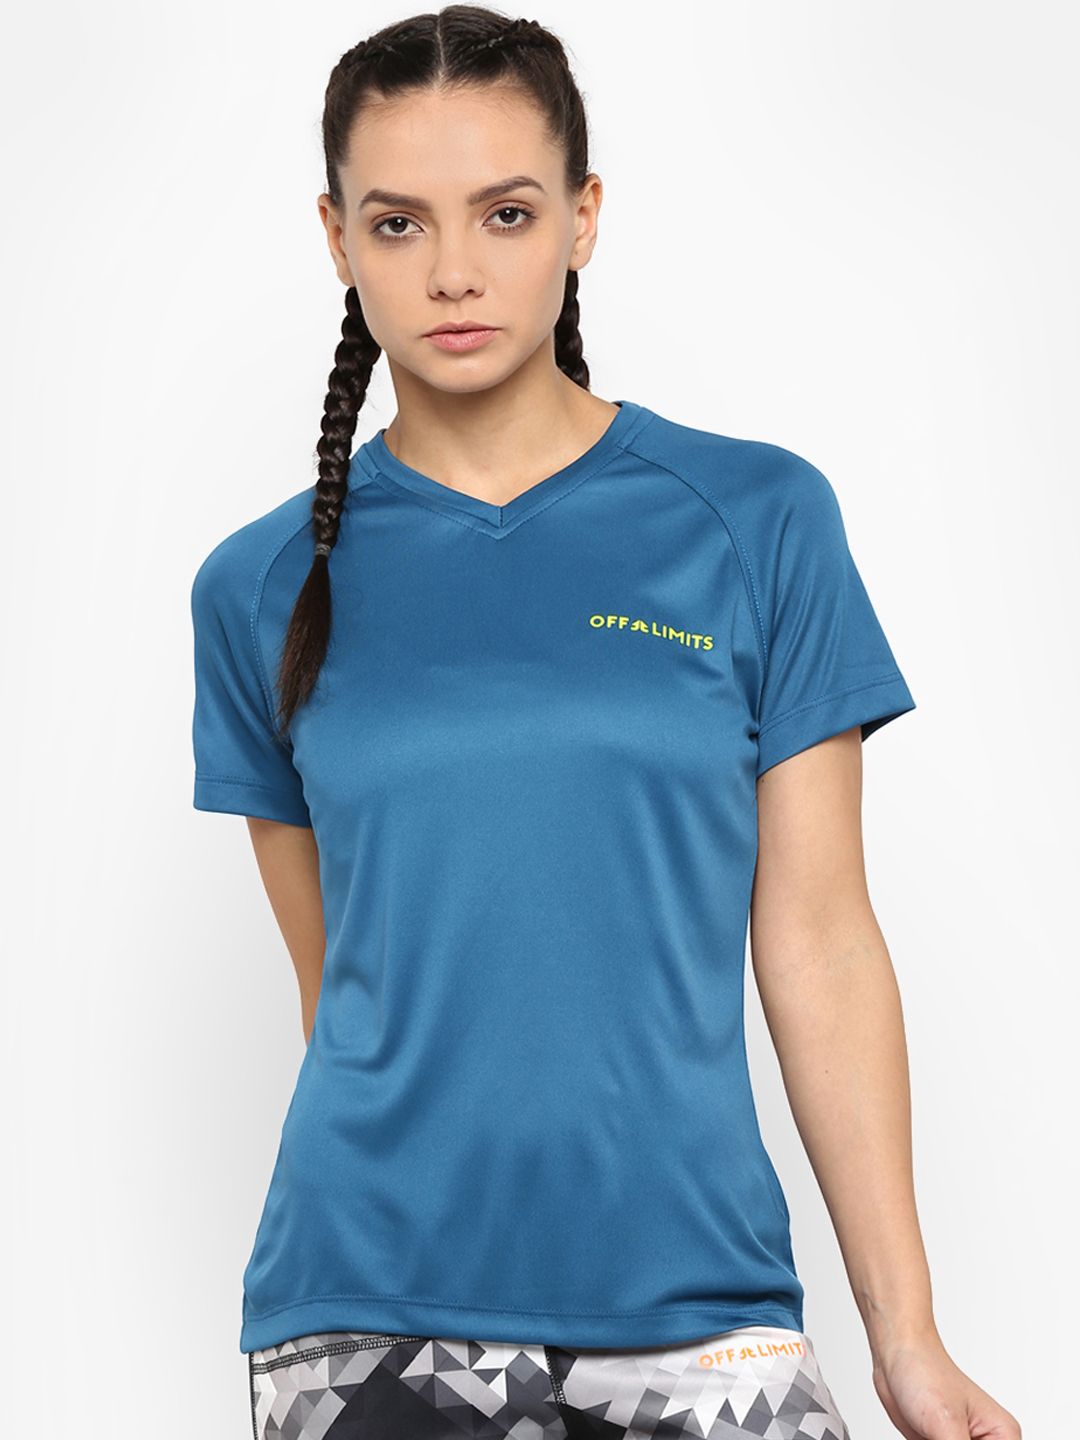 OFF LIMITS Women Blue Solid V-Neck T-shirt Price in India